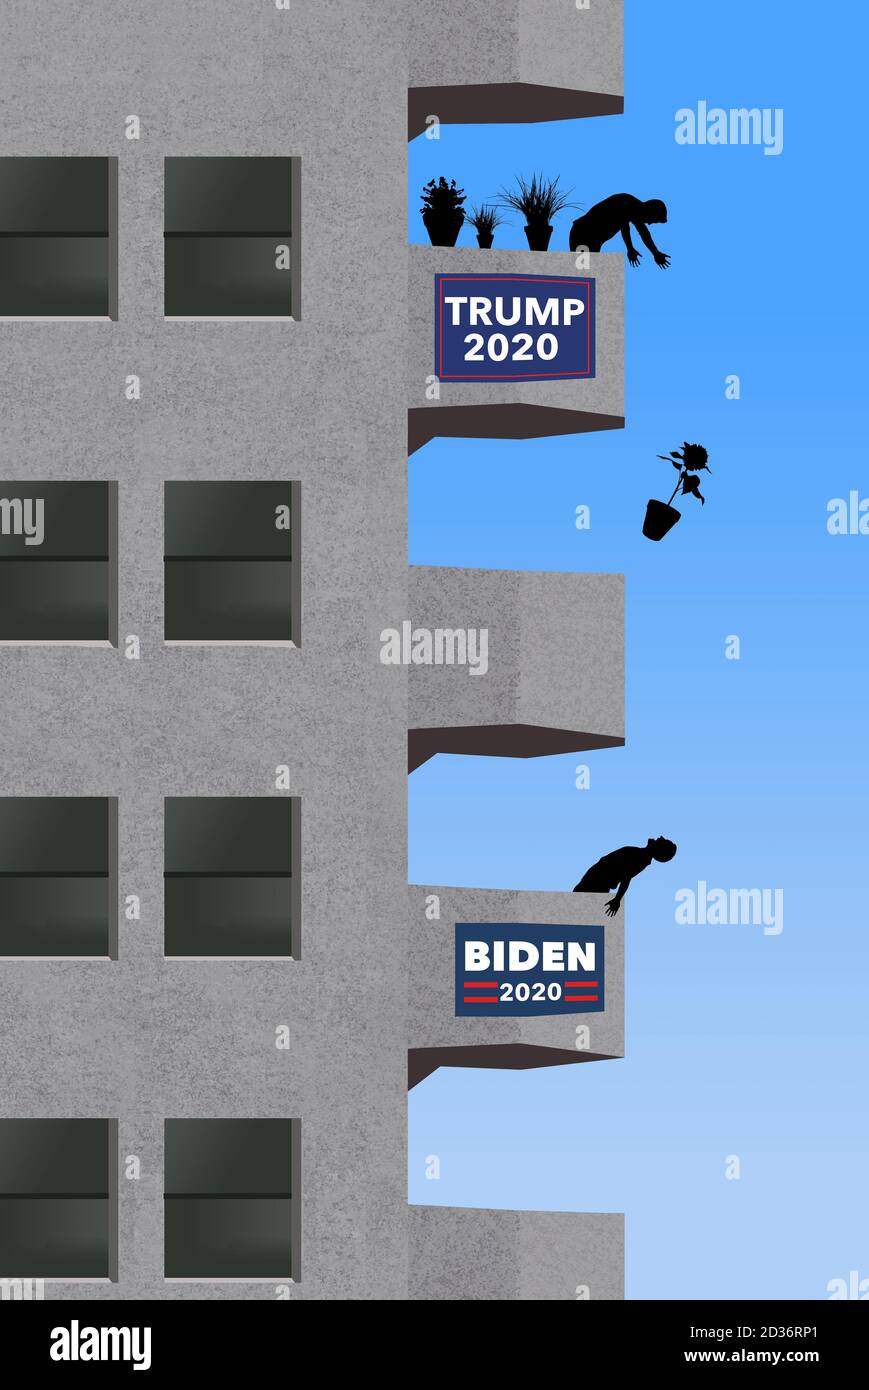 Neighbors feud over the 2020 election candidates with one man dropping a potted plant toward his neighbor below on balconies of an apartment building. Stock Photo